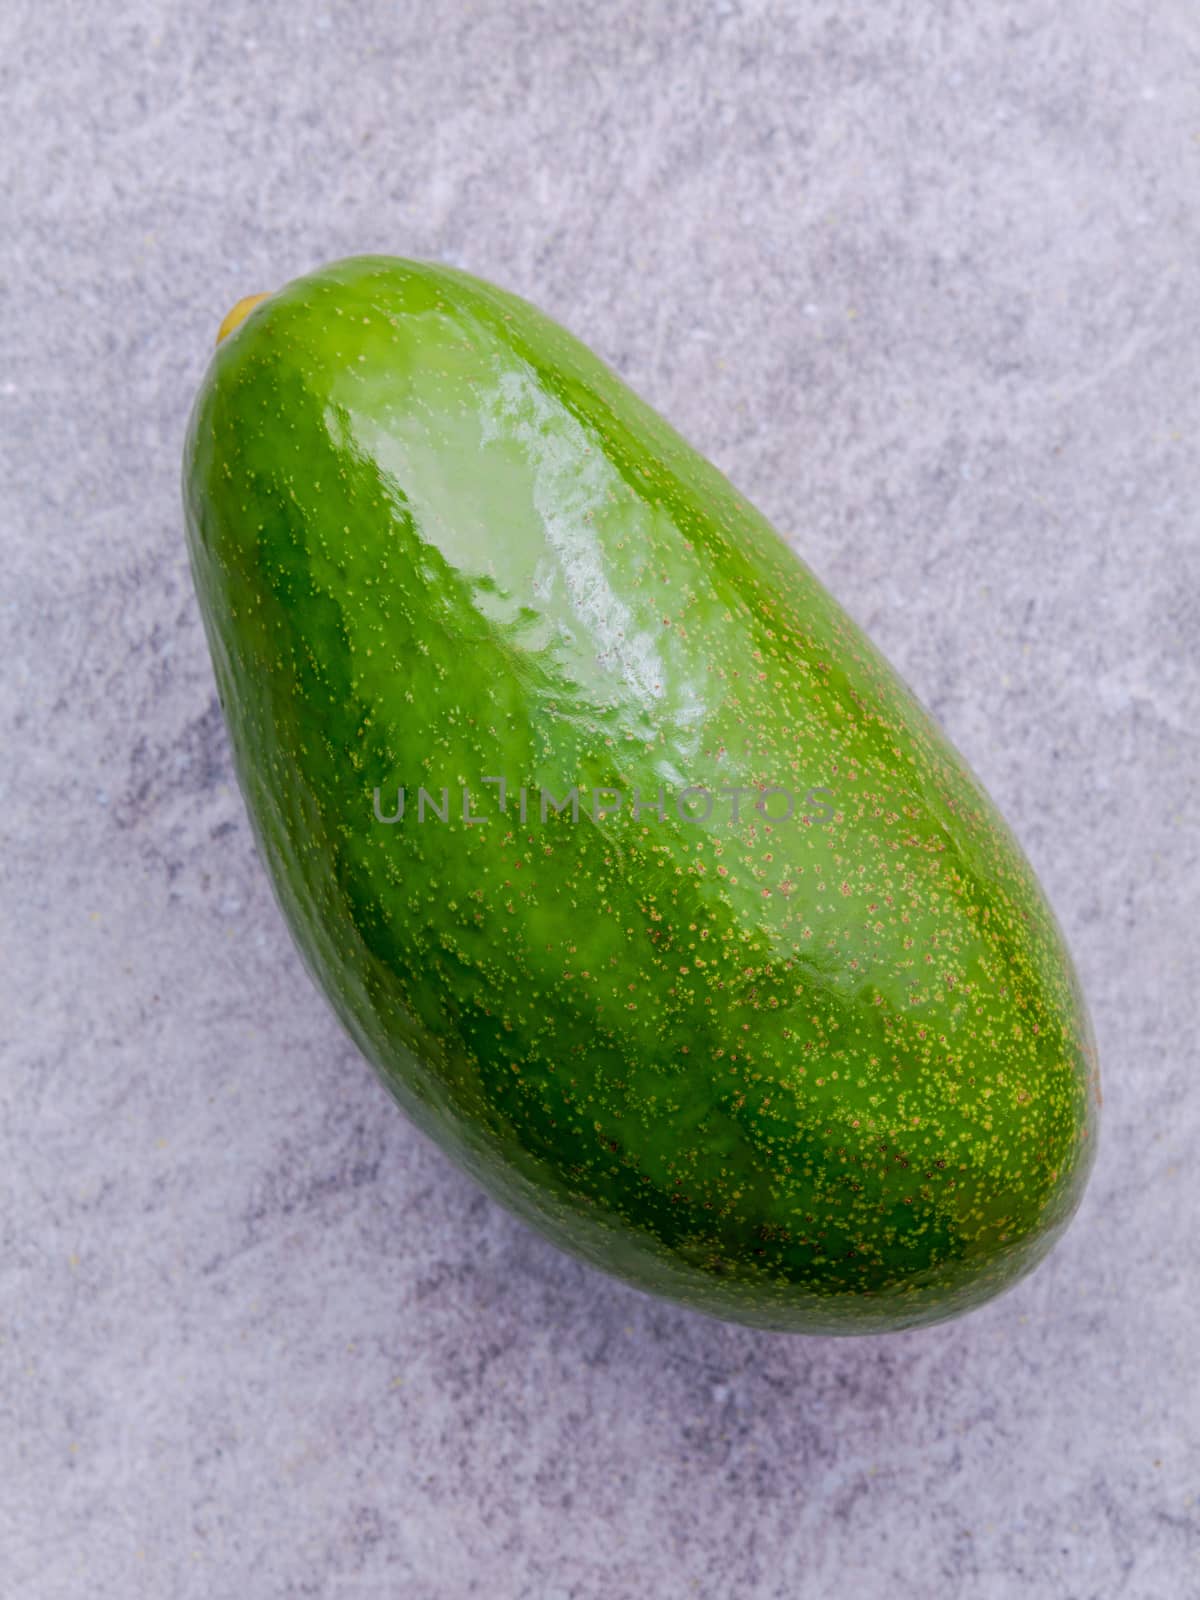 Fresh avocado on stone background. Organic avocado healthy food concept.
The avocado is popular in vegetarian cuisine and weight control.